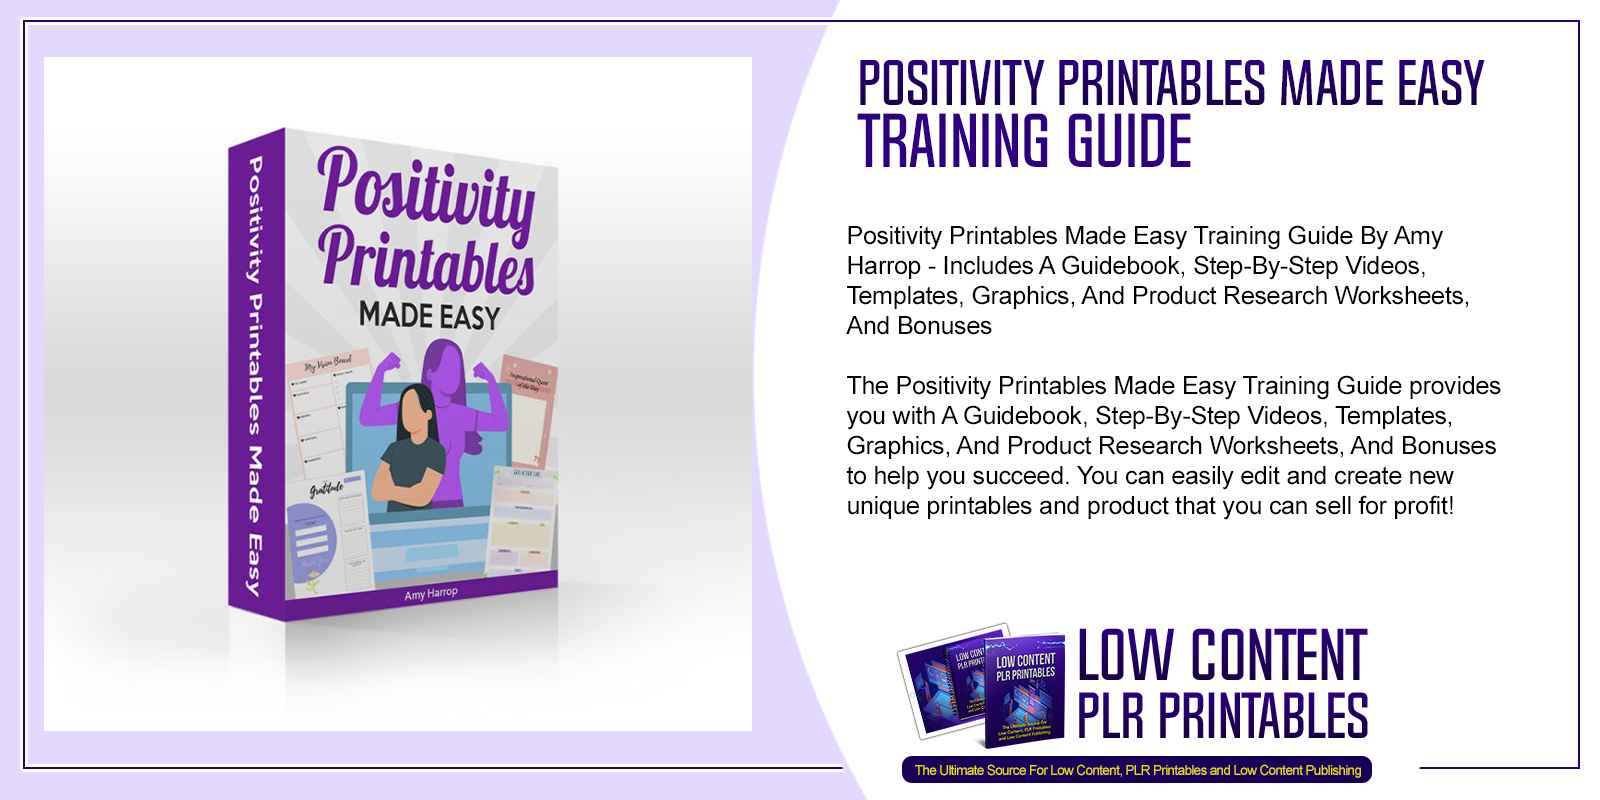 Positivity Printables Made Easy Training Guide